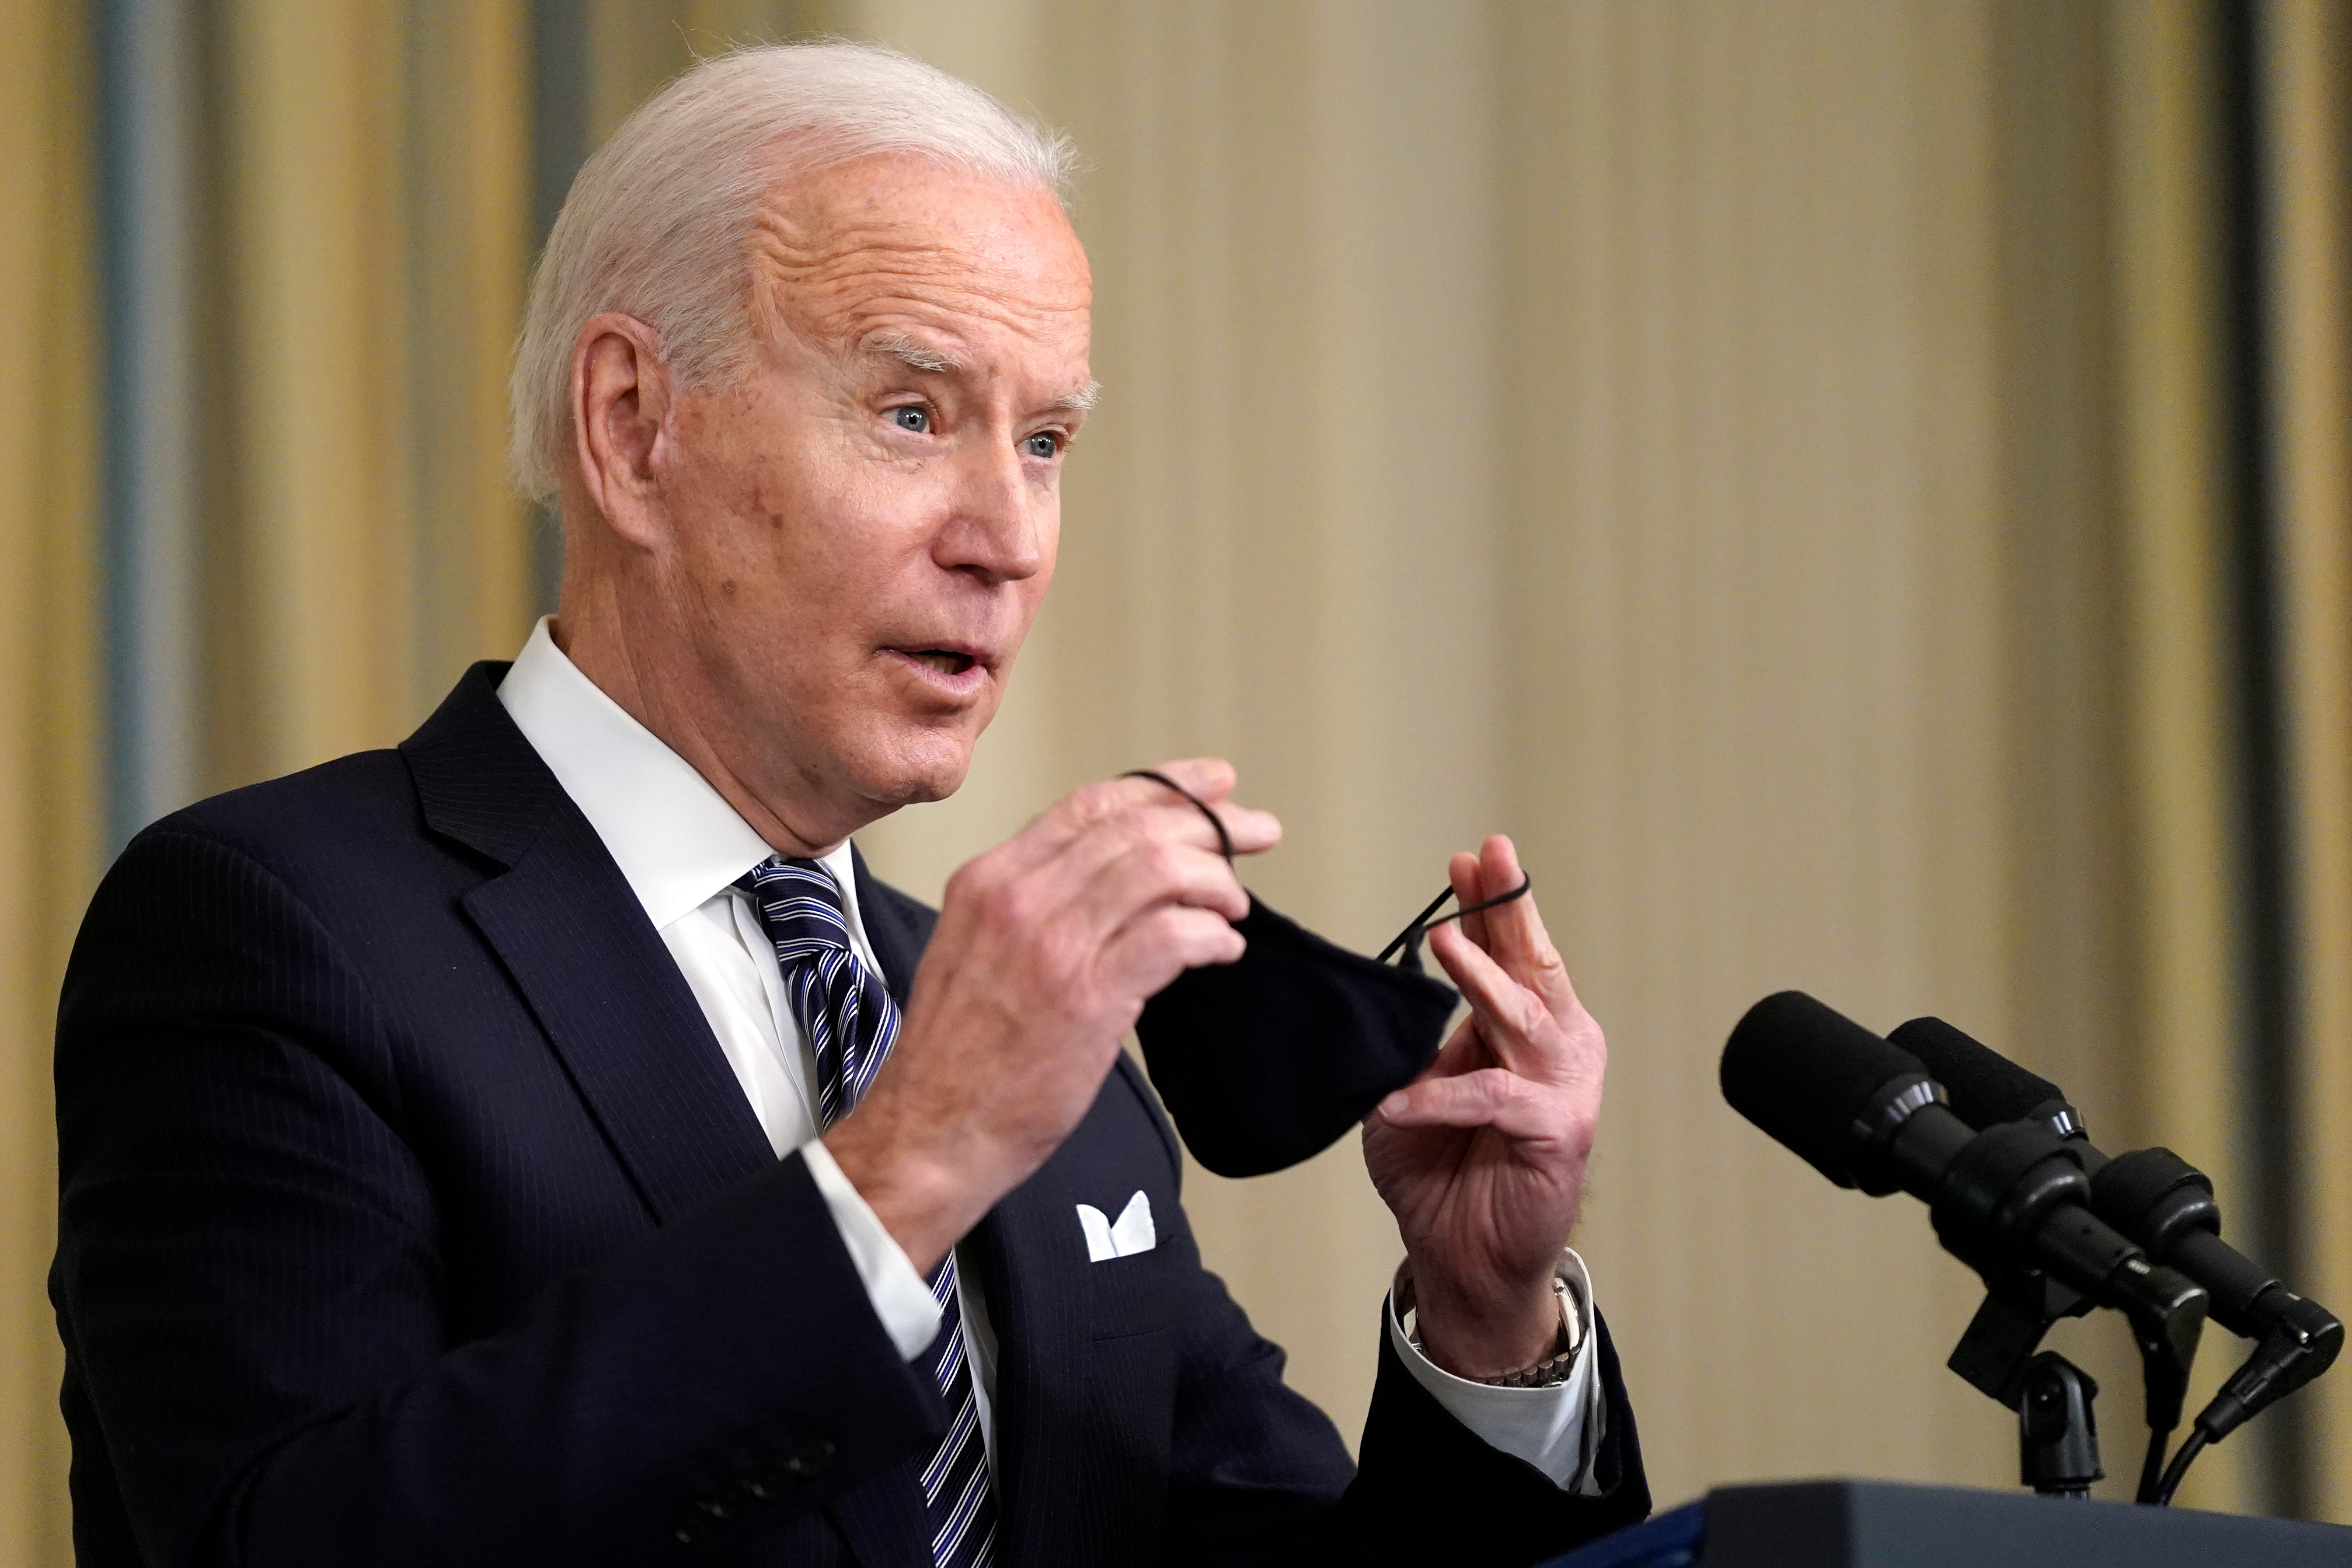 Republicans explode with fury over Biden vaccine mandate: 'Absolutely unconstitutional'